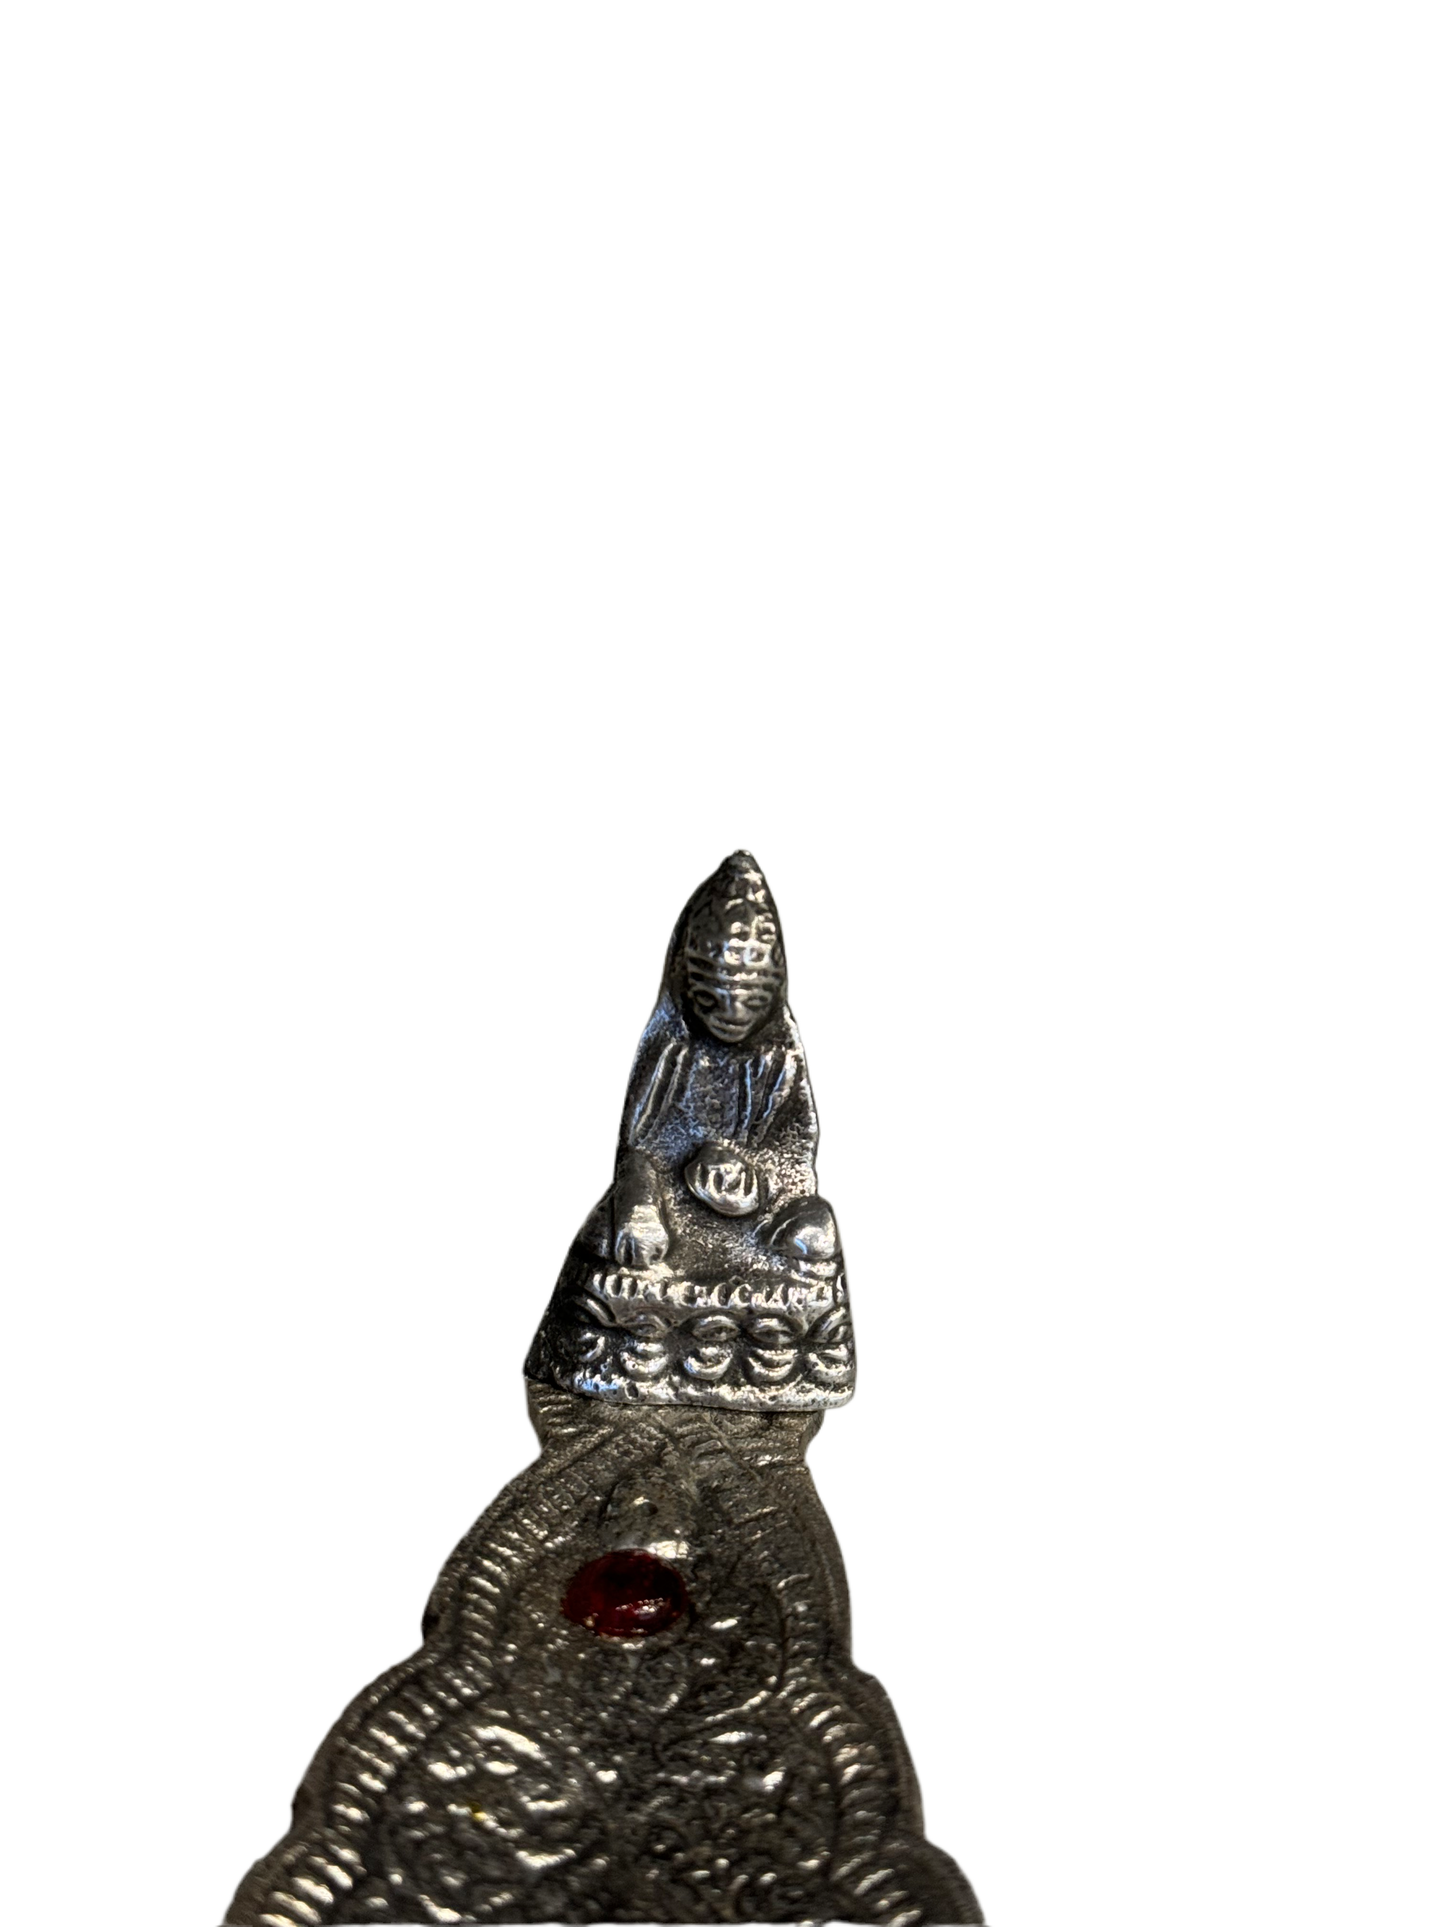 Thai Buddha Silver Aluminum Leaf Incense Stick Holder with Red Stone